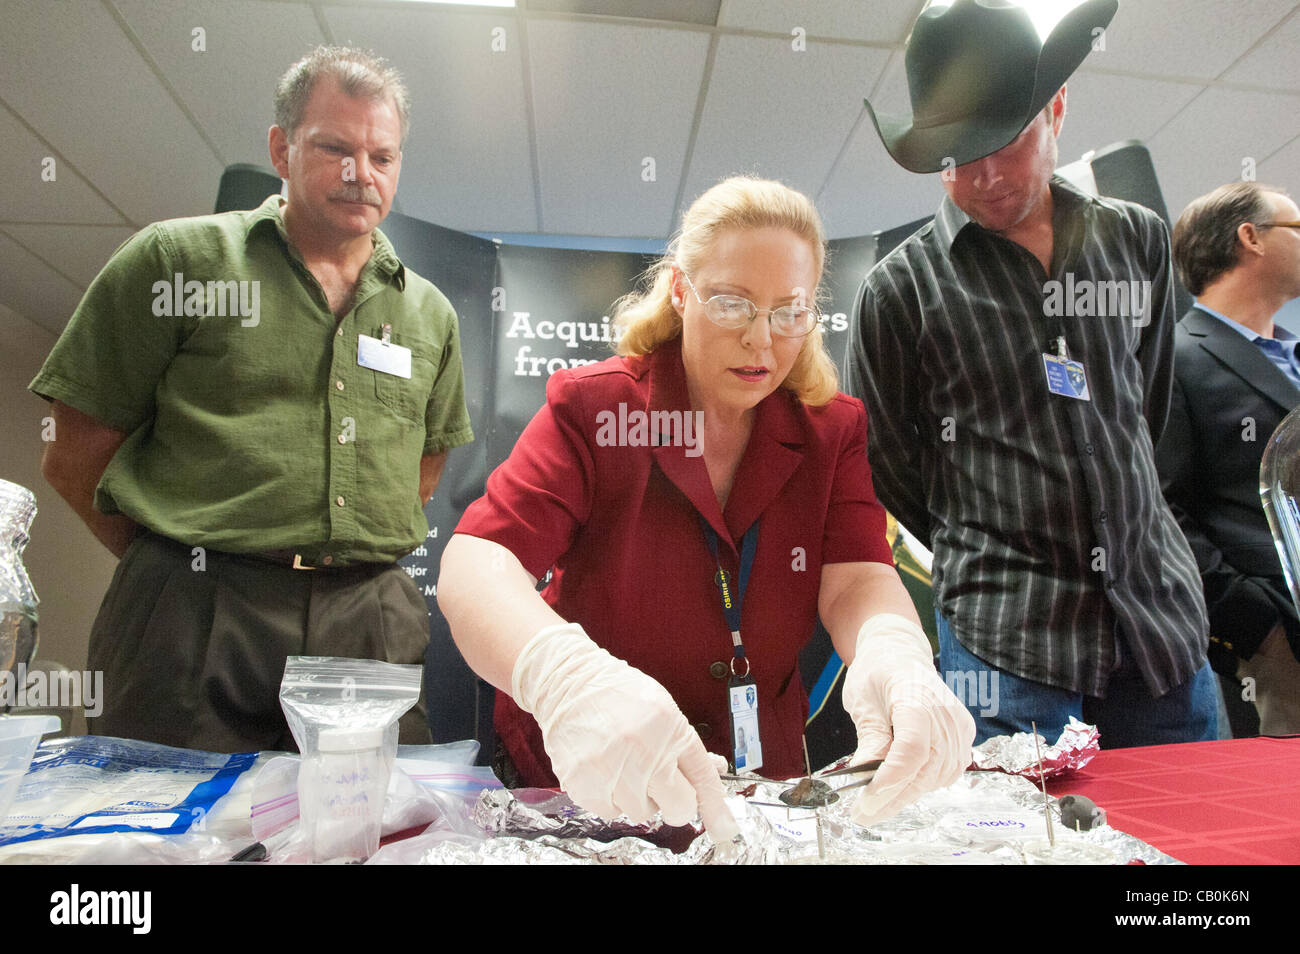 May 15, 2012 - Tucson, U.S - Meteorite hunters GREG HUPE and ROBERT WARD look on as DOLORES HILL places a sample of the ''Sutter's Hill'' meteorite that landed in California in April on a stand. The University of Arizona is the recipient of samples of a rare meteorite that crashed in Calif. in April Stock Photo